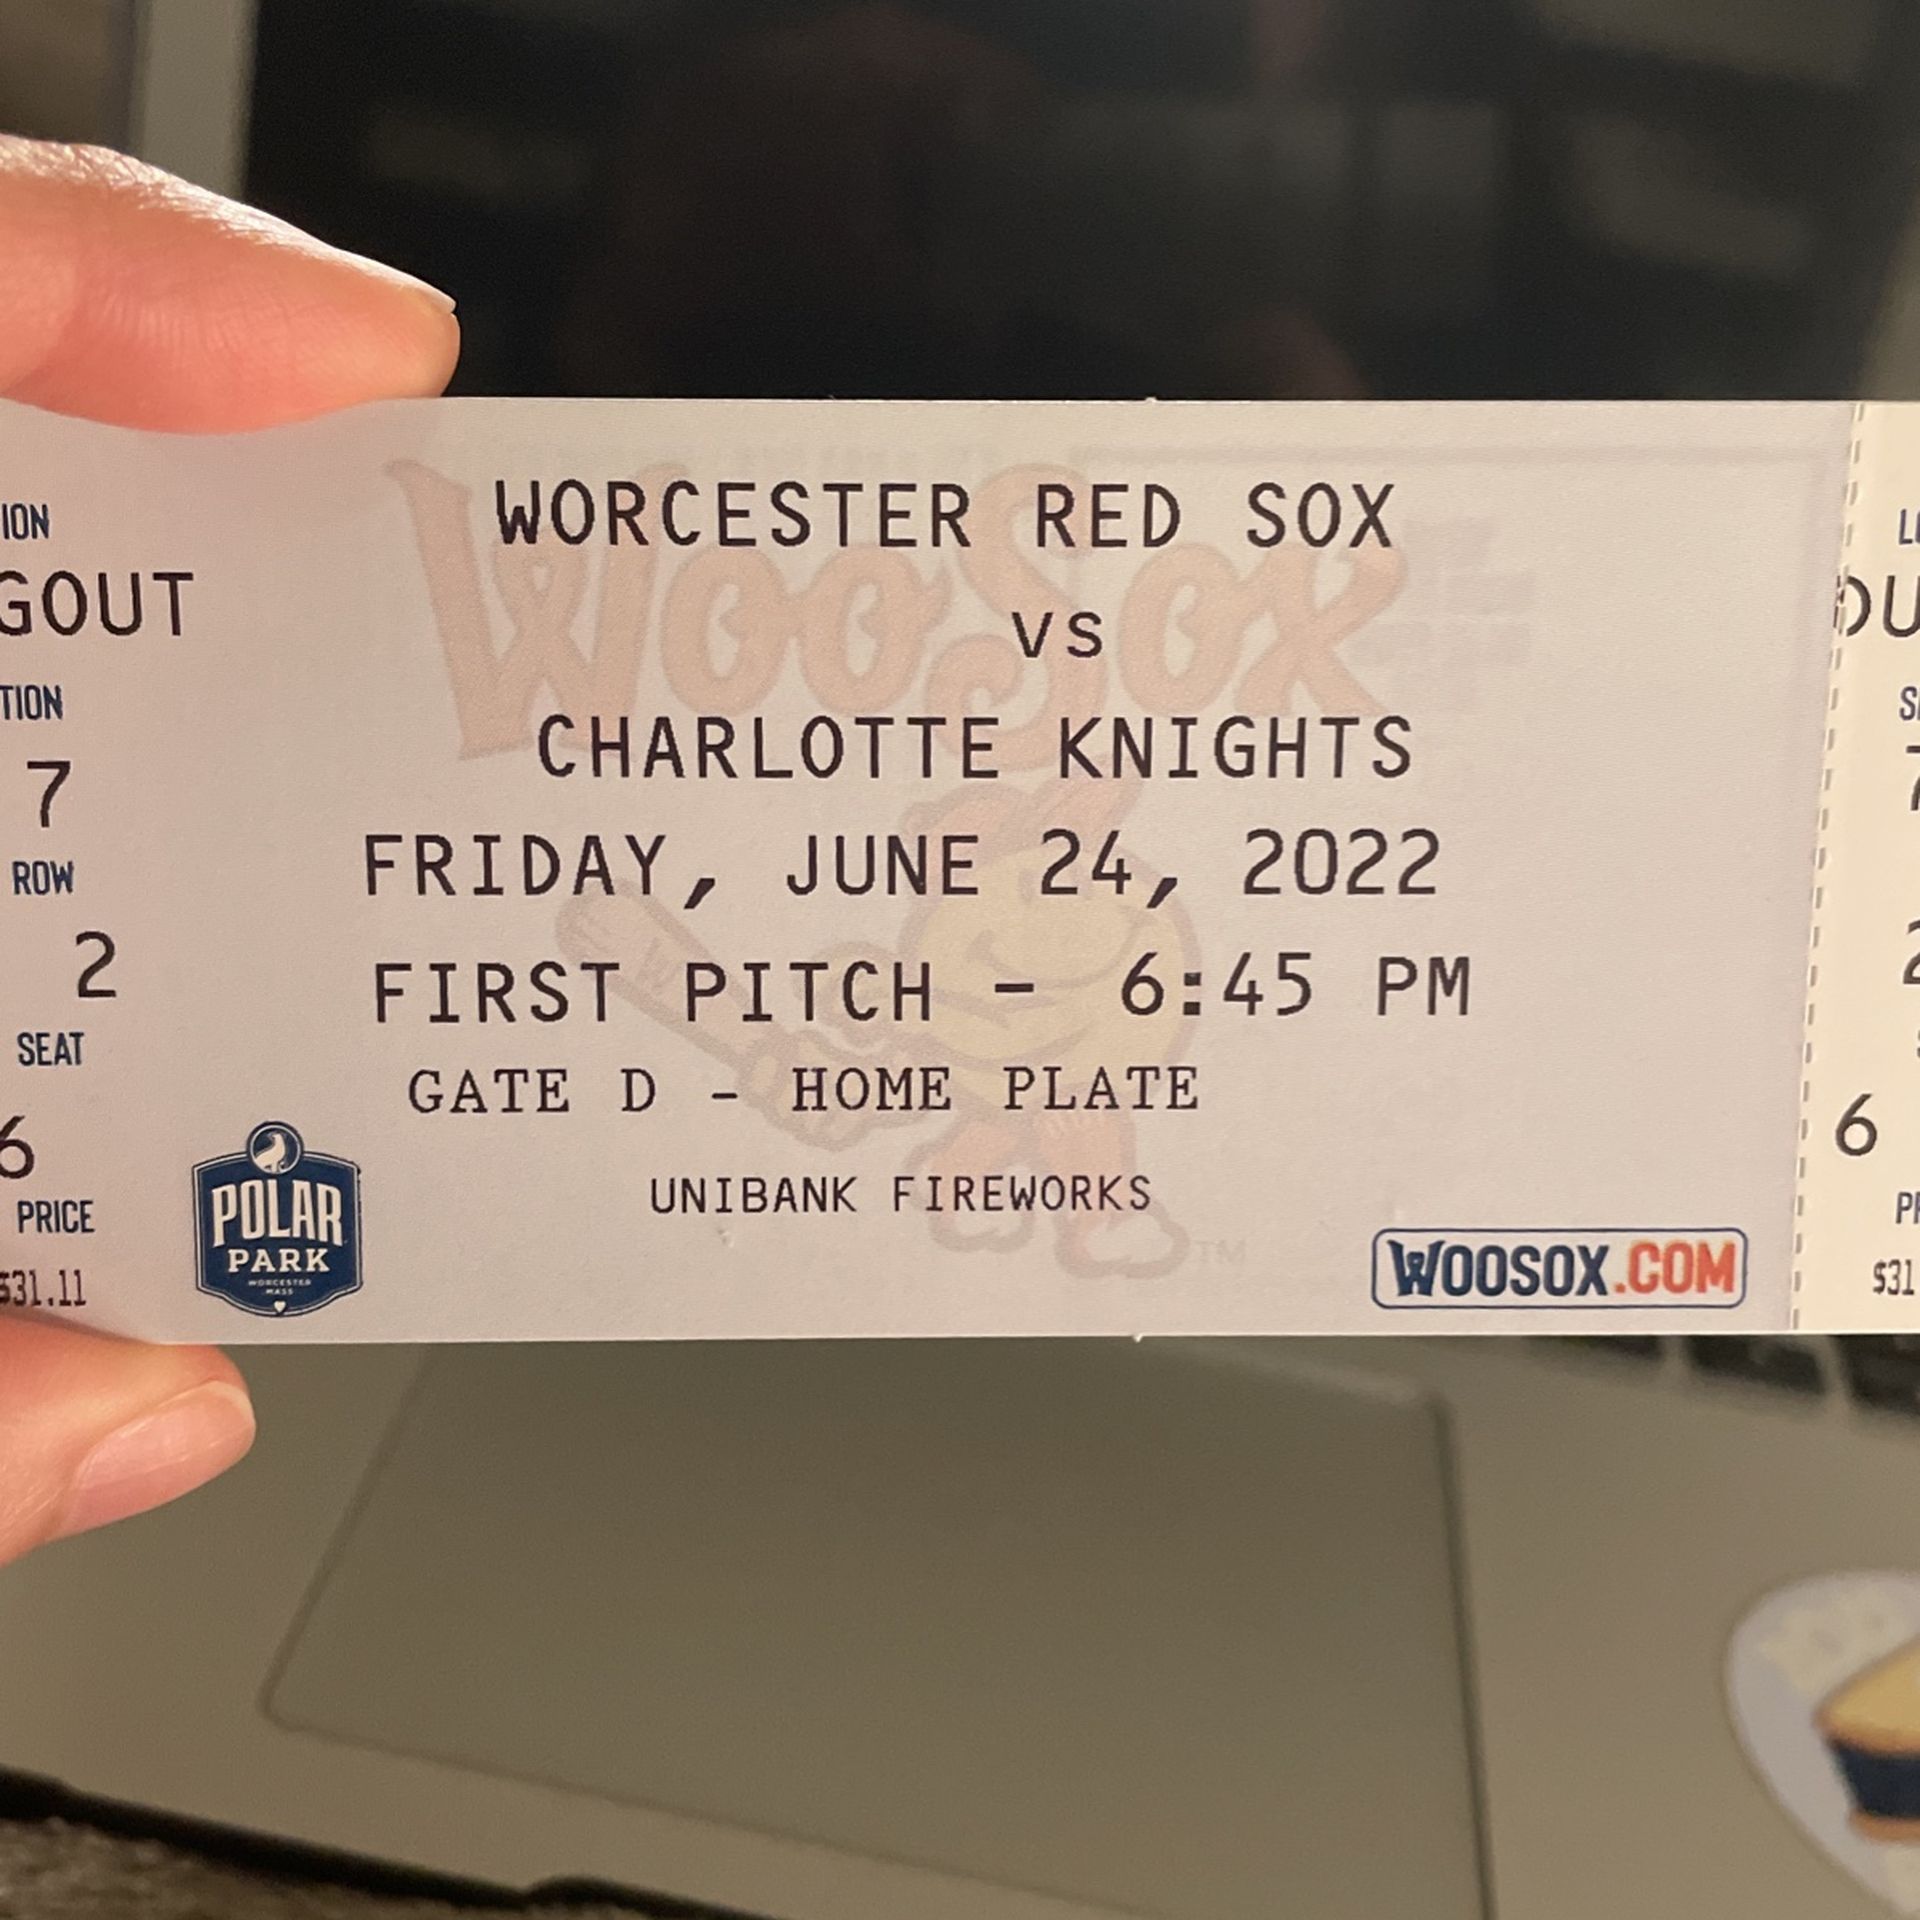 Woosox Game June 24th- Sale. I Have 2 Tickets. Original Price $32+ticket Fees 